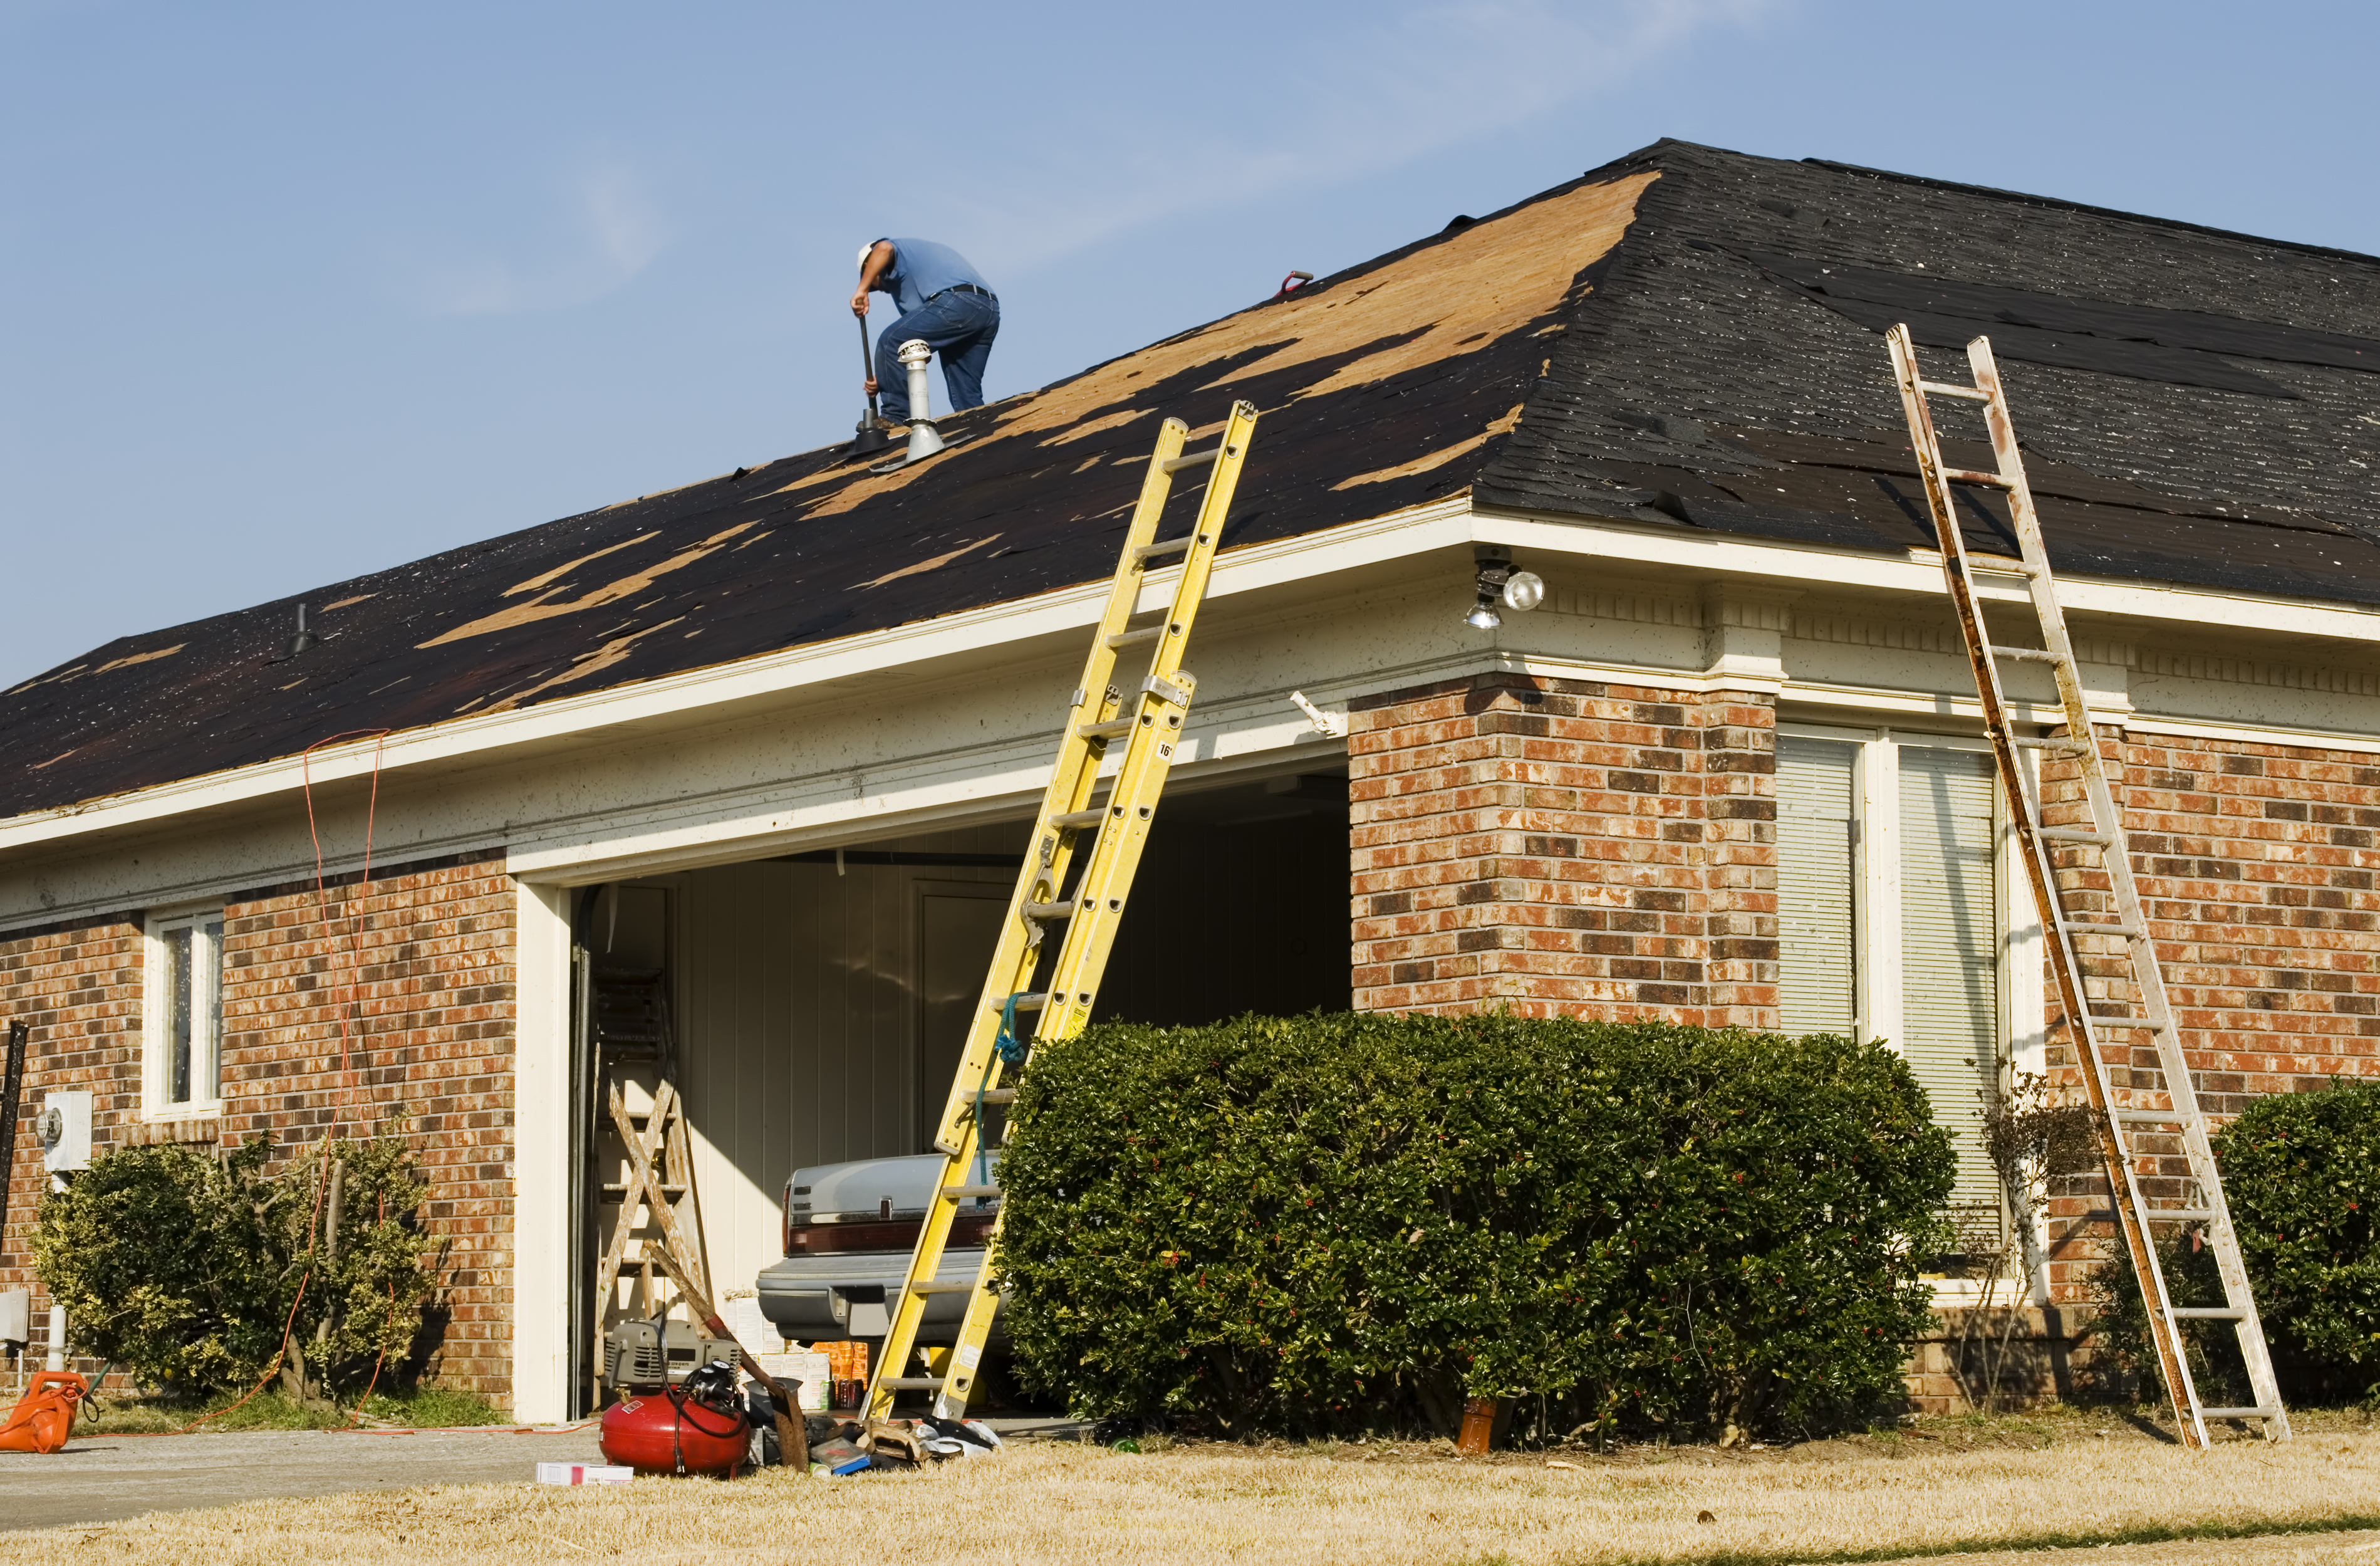 Thomas Quality Construction offers complete roof restoration services throughout the greater Lexington area.